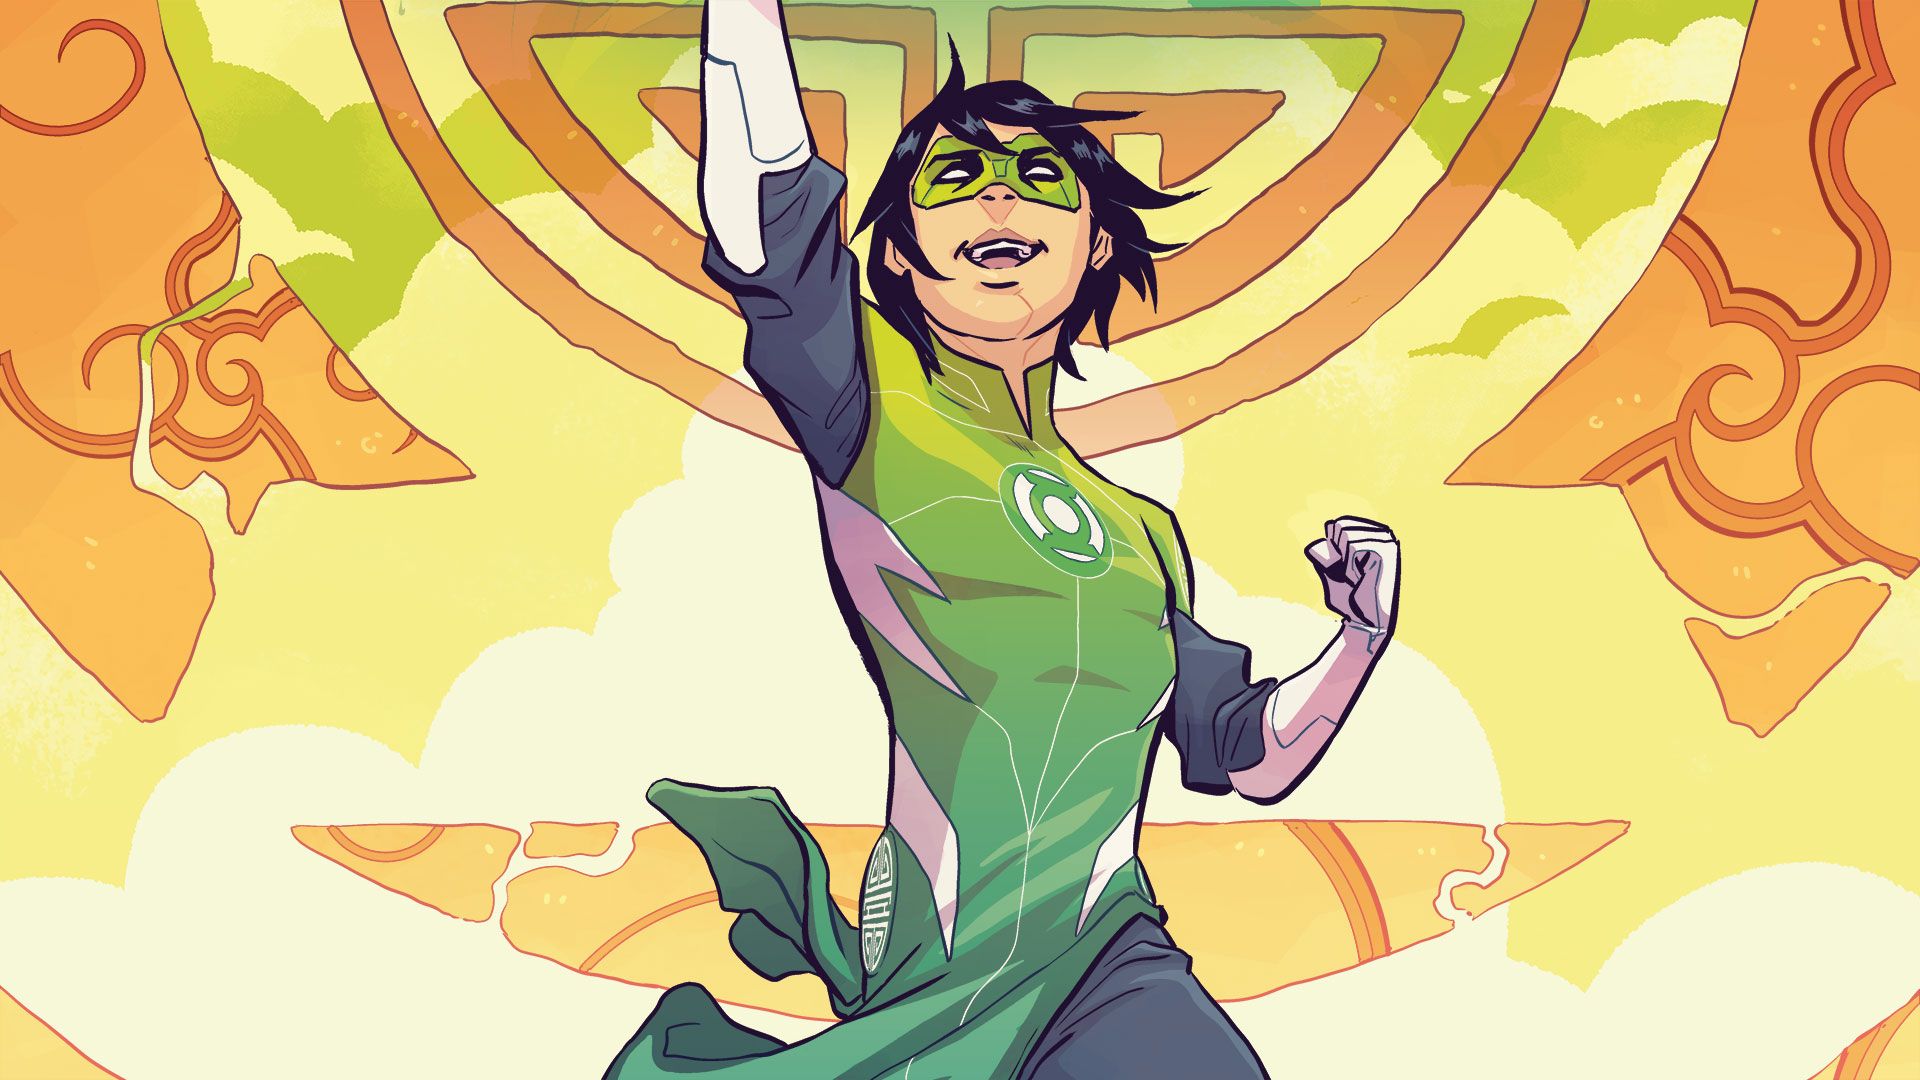 Green Lantern: Legacy Reminds Us that Heroism is Found Close to Home